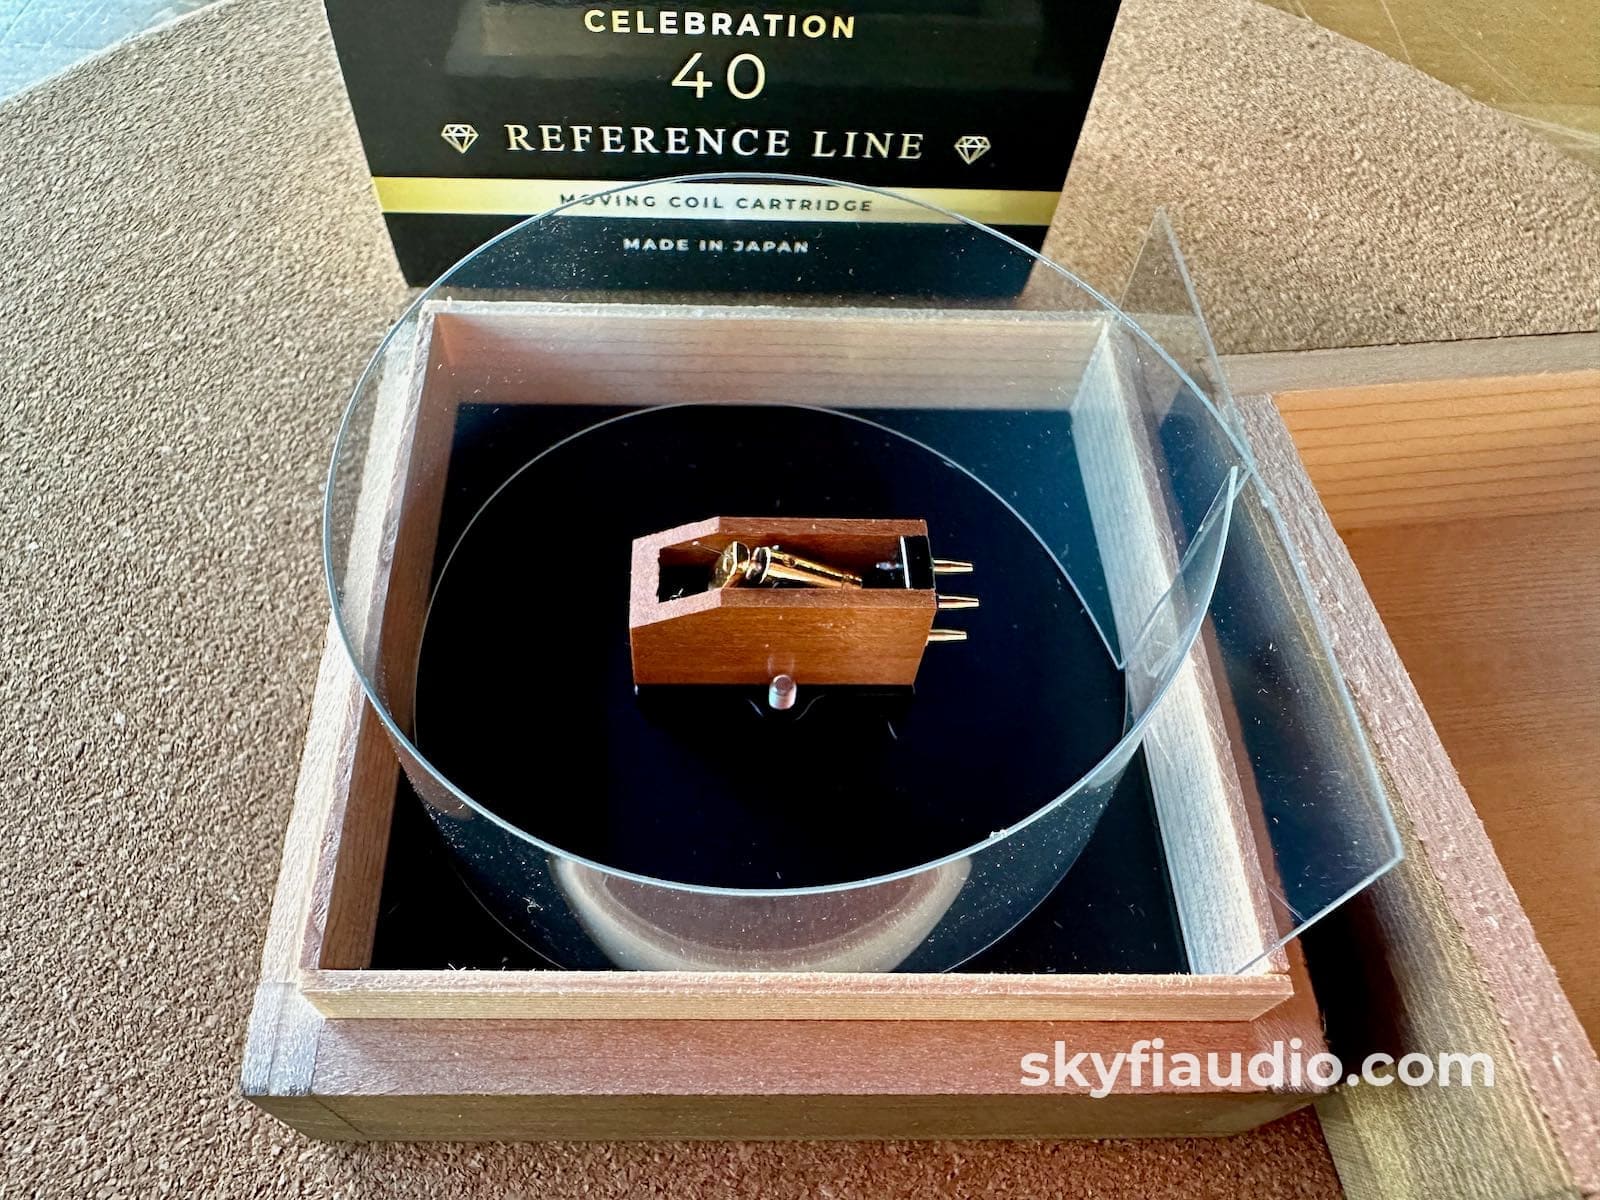 Direct Drive Turntable System Sl-1000Re-S With Sumiko Celebration 40 Cartridge